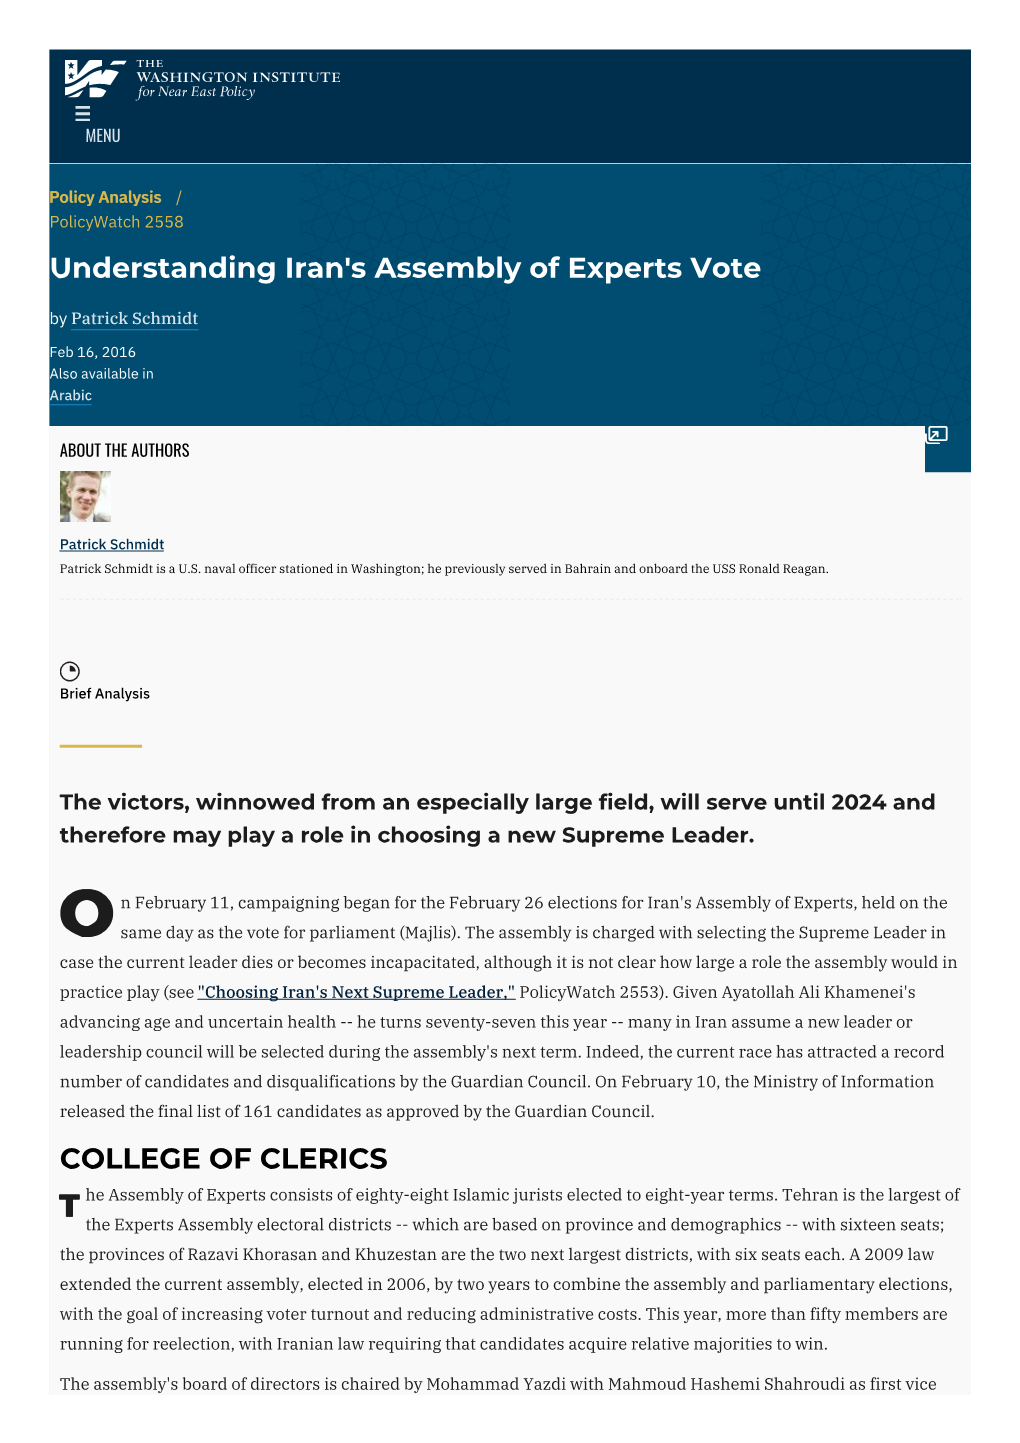 Understanding Iran's Assembly of Experts Vote | the Washington Institute